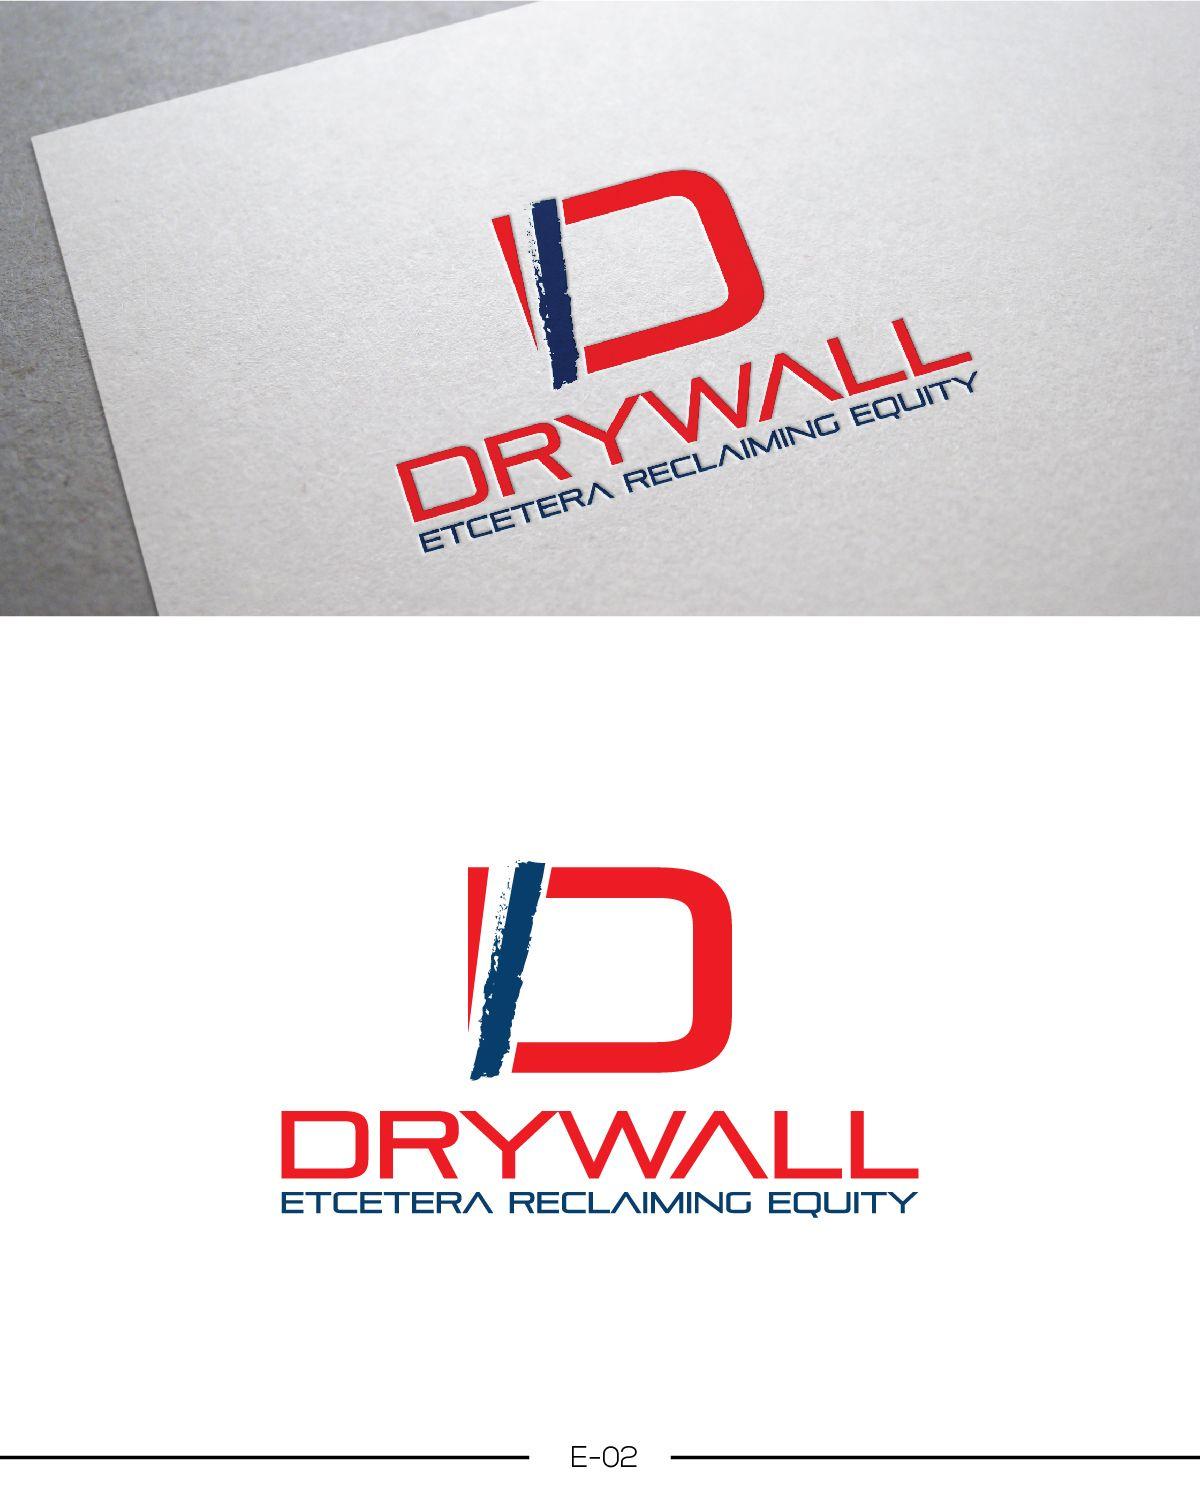 Drywall Company Logo - Conservative, Bold, Trade Logo Design for Drywall Etcetera ...